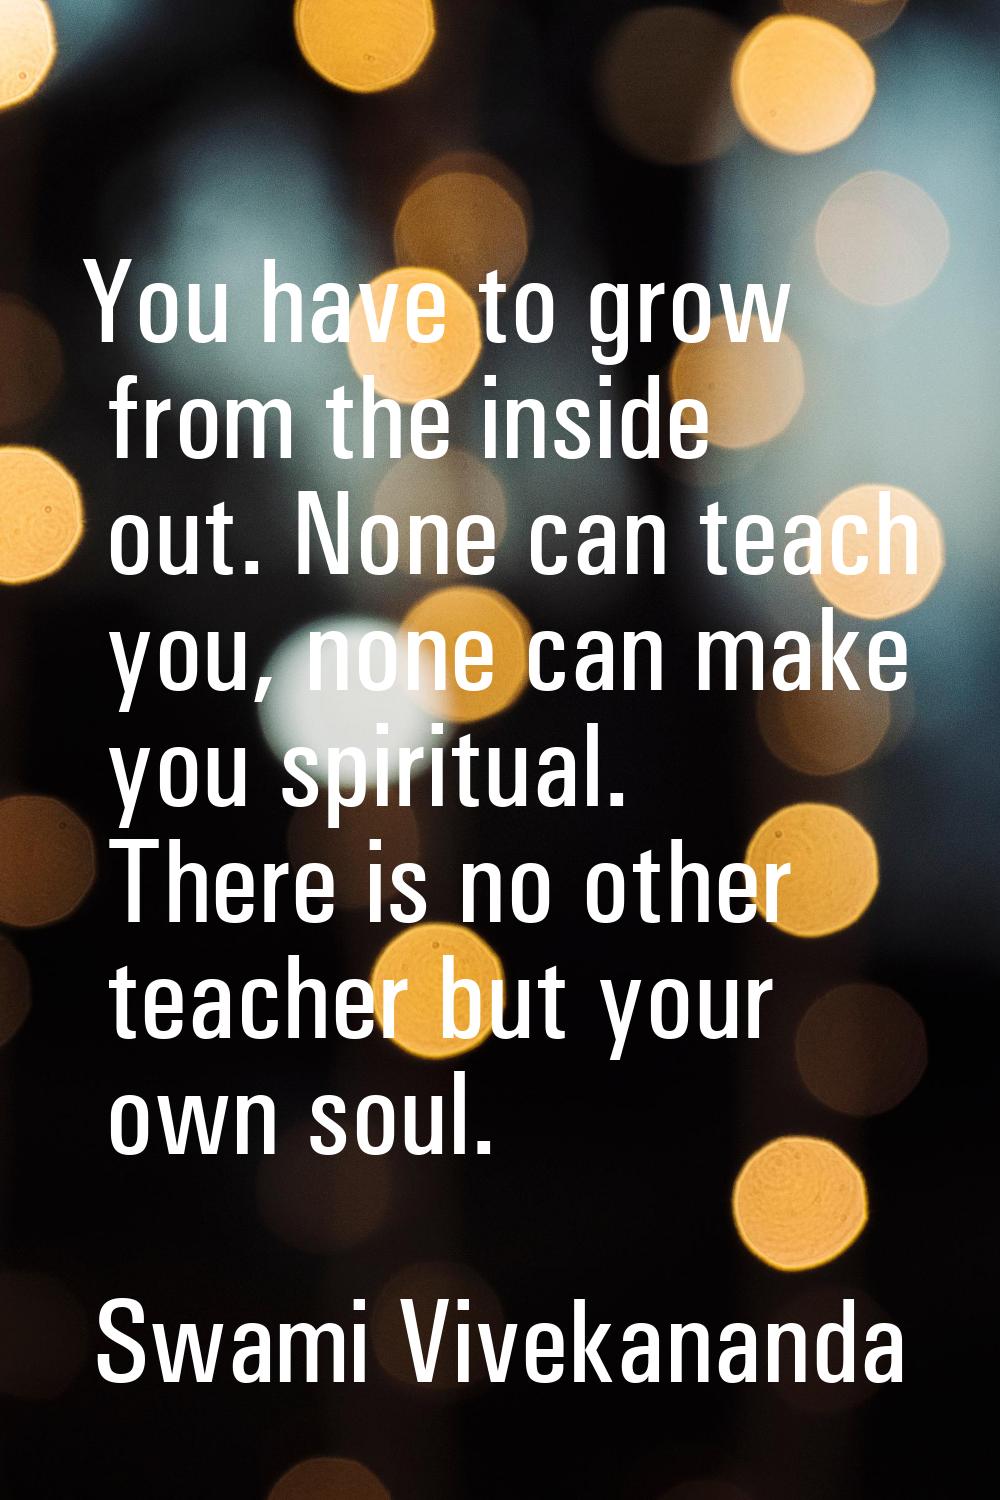 You have to grow from the inside out. None can teach you, none can make you spiritual. There is no 